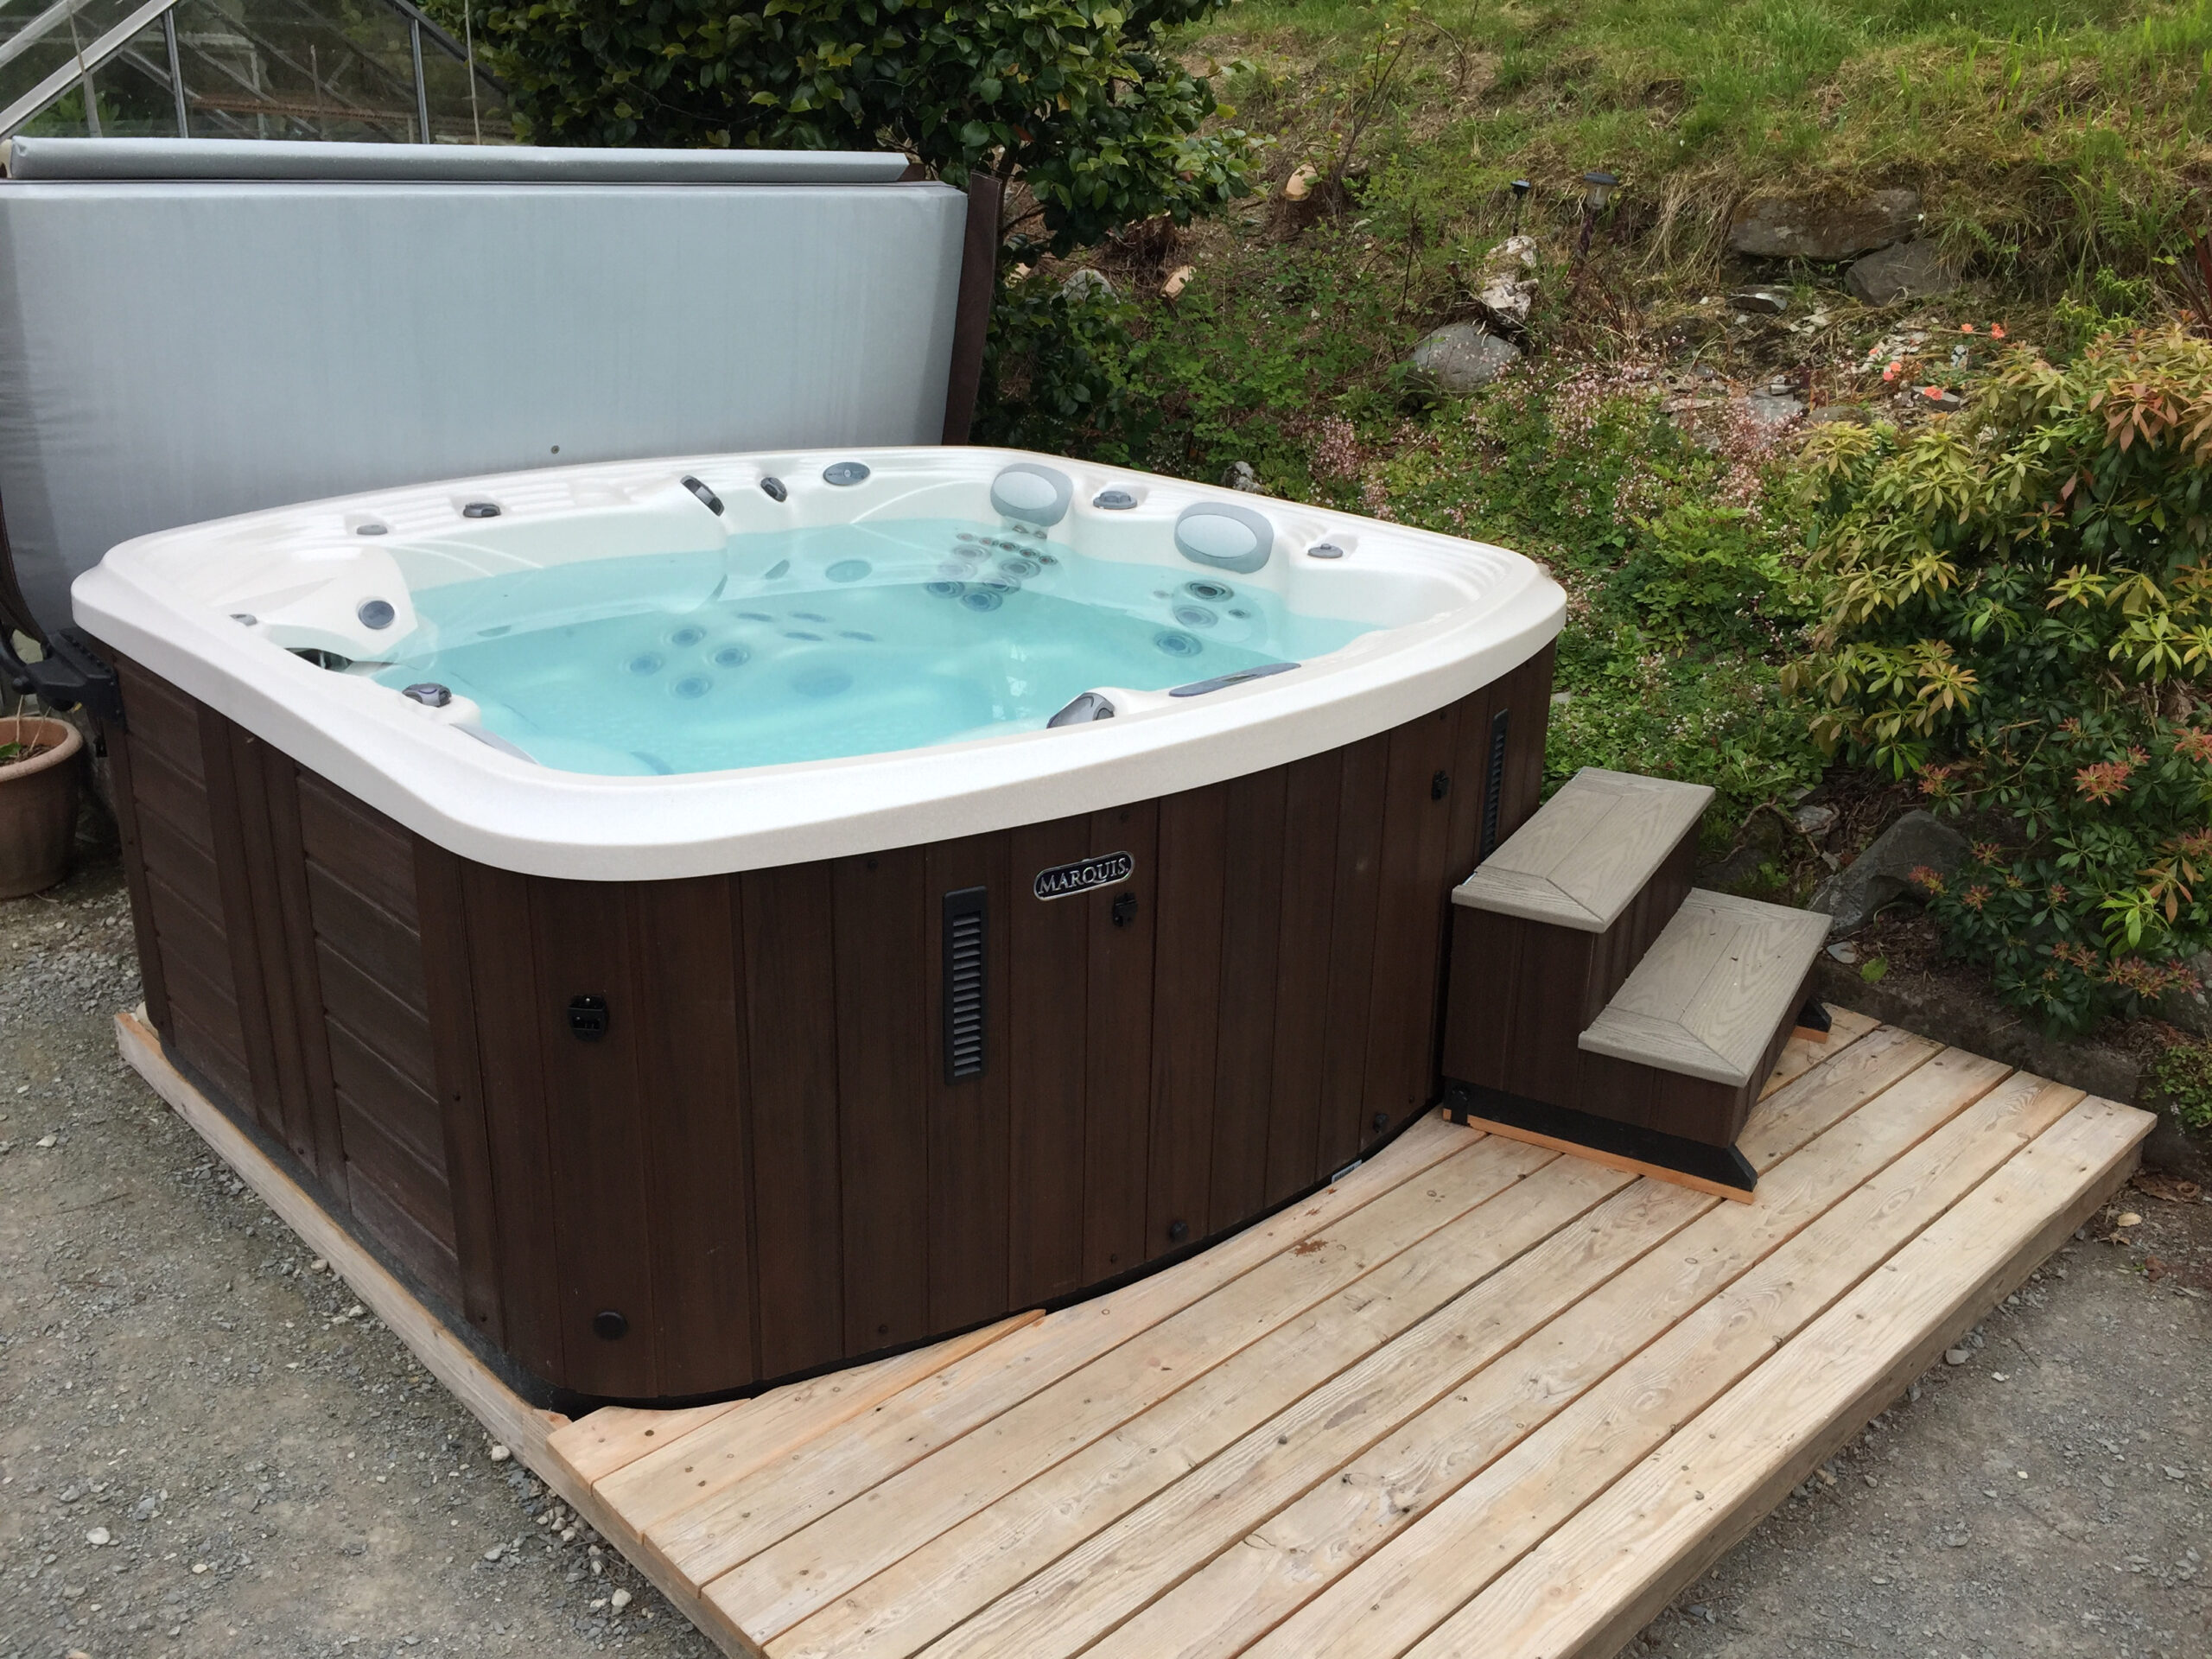 Marquis Spas Crown Resort Hot Tub with white shell on decking